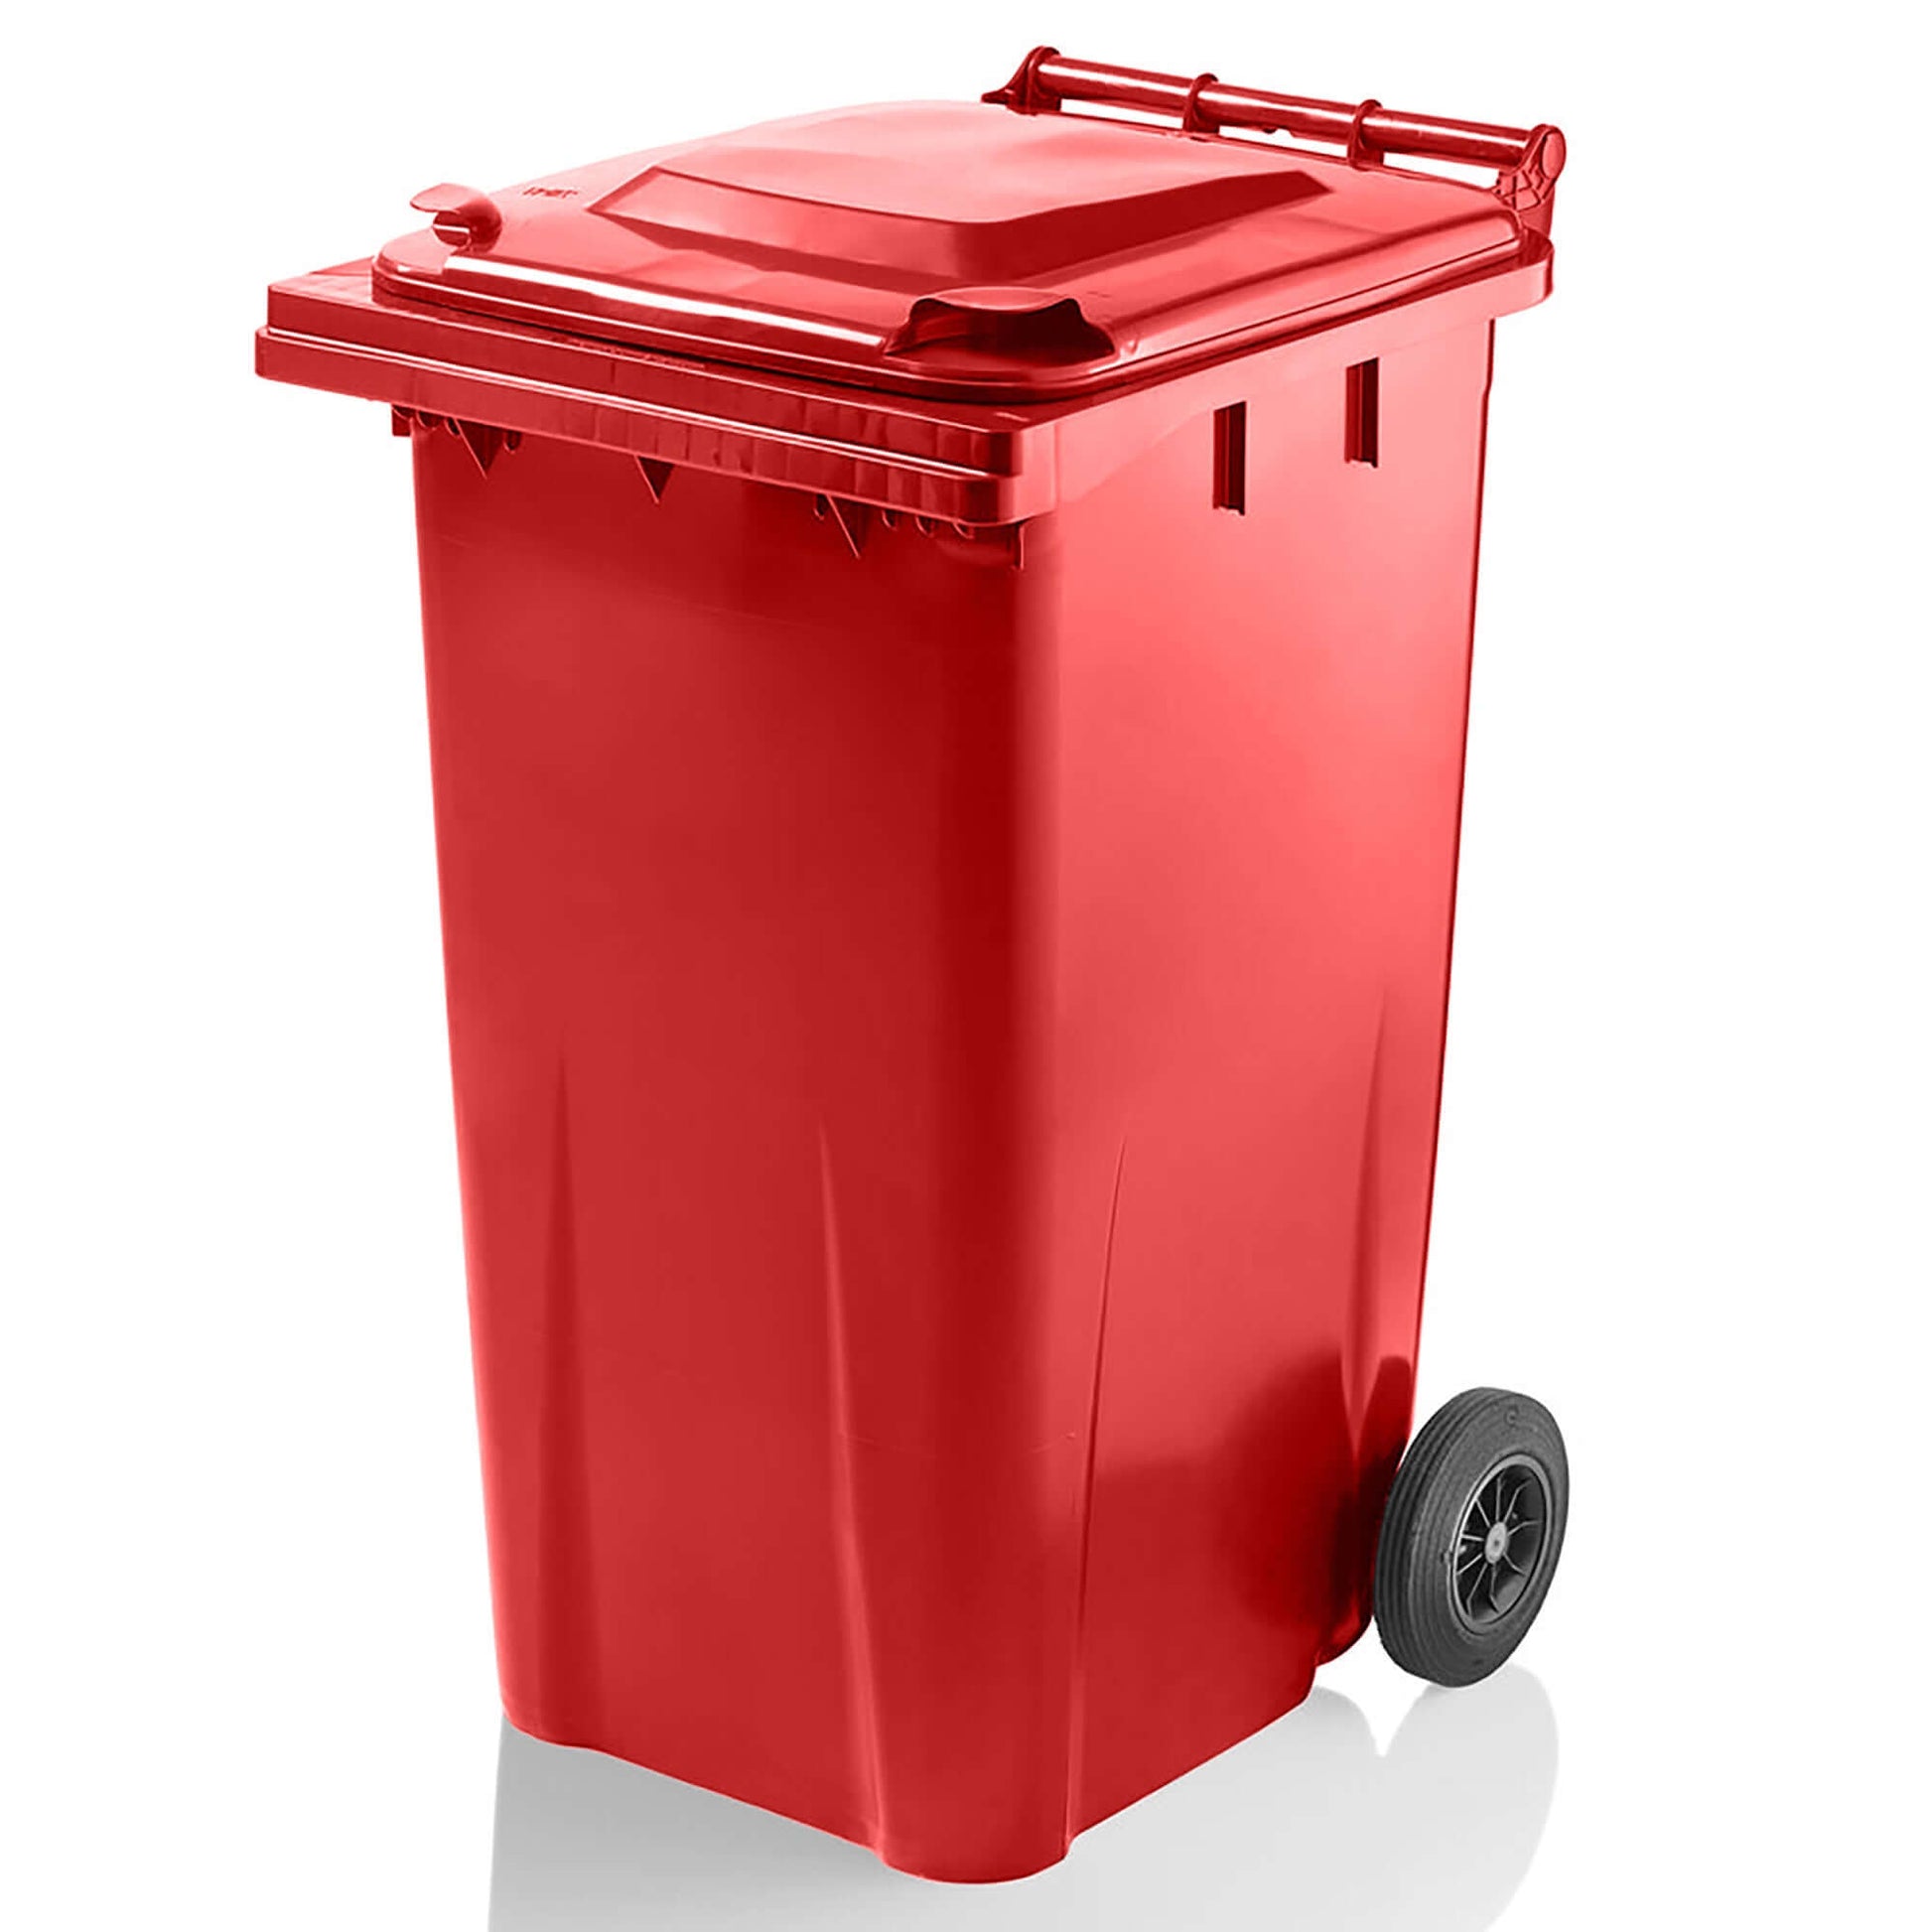 Express Wheelie Bin 240L Litre Red Small Medium Large Council Replacement Waste Rubbish Recycle